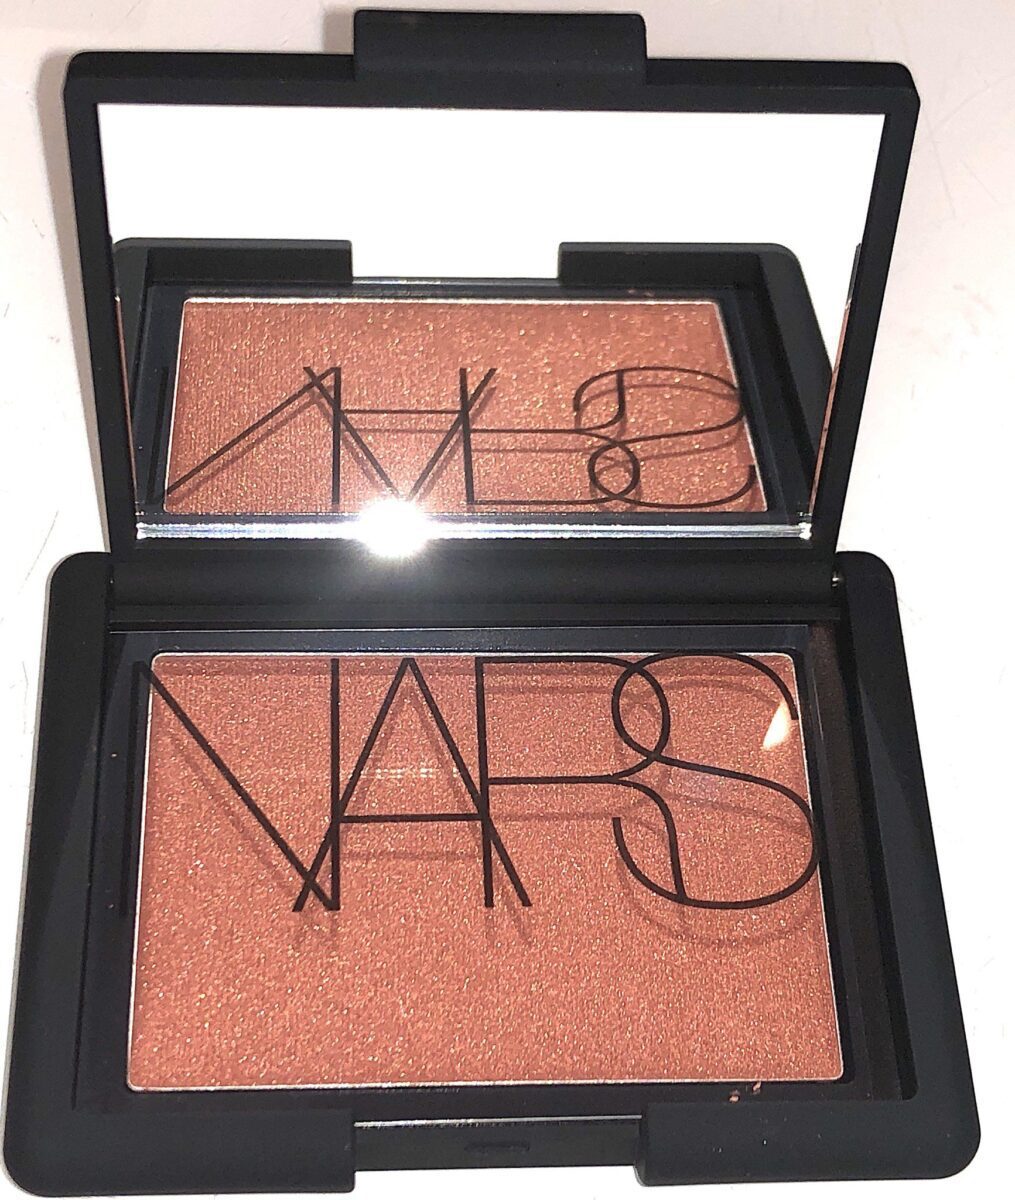 THE SAVAGE NARS ICONIC BLUSH TEN NEW COLORS PALETTE